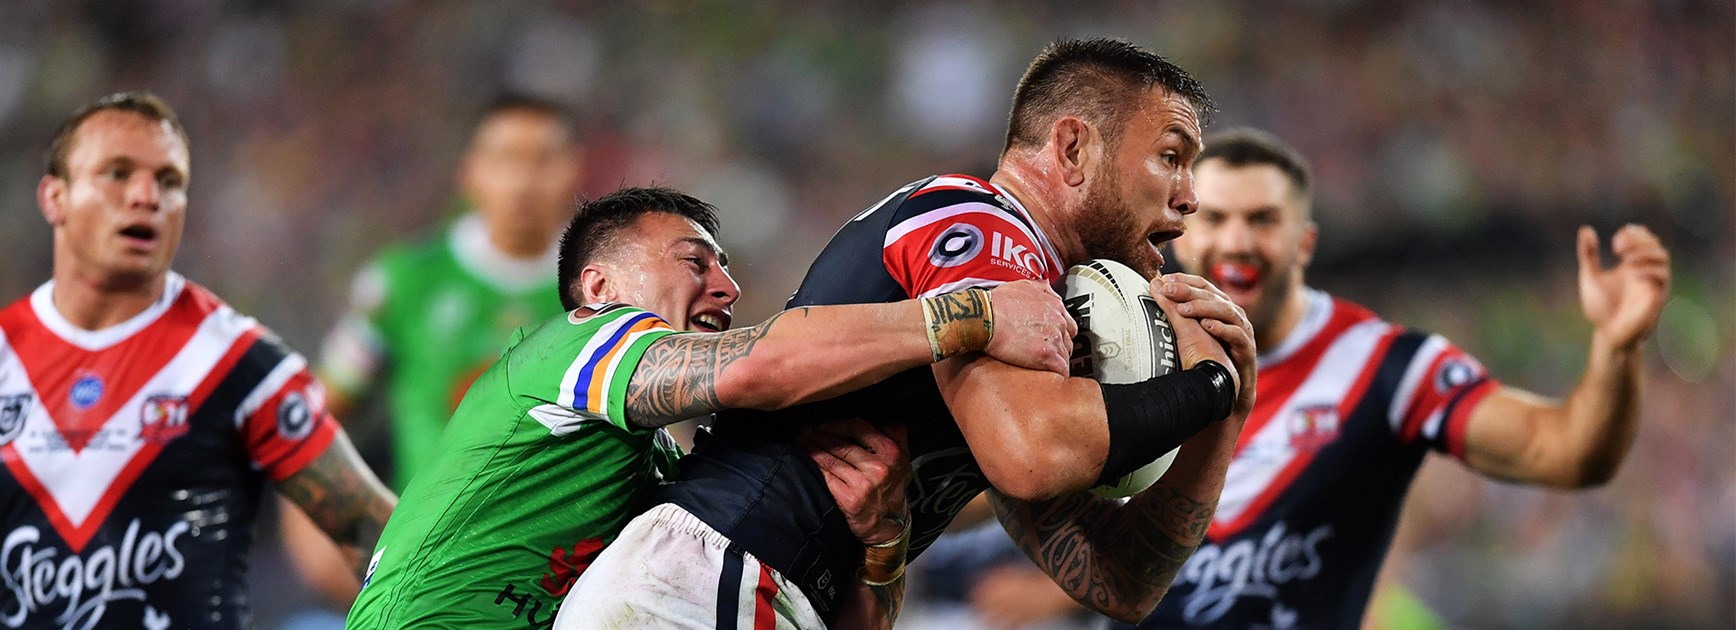 Match Preview | Roosters v Raiders